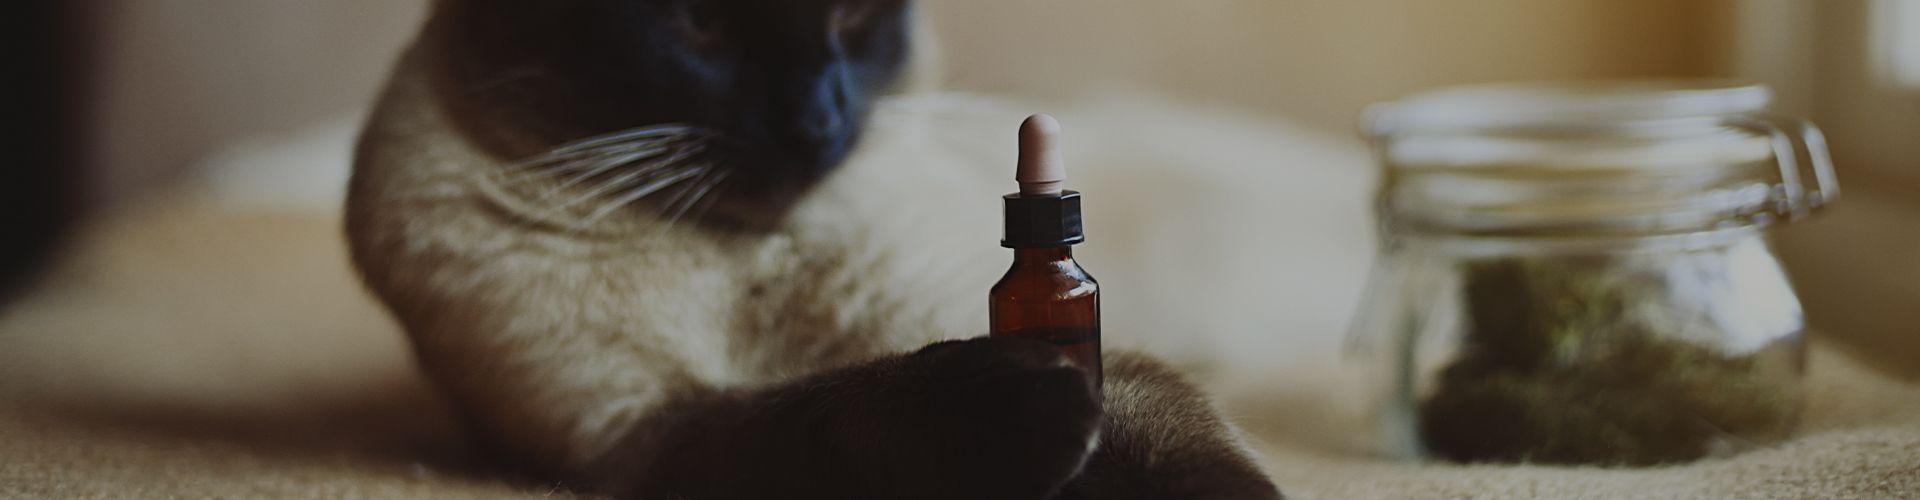 cat catching cbd oil dropper animals with out focus background selective focus